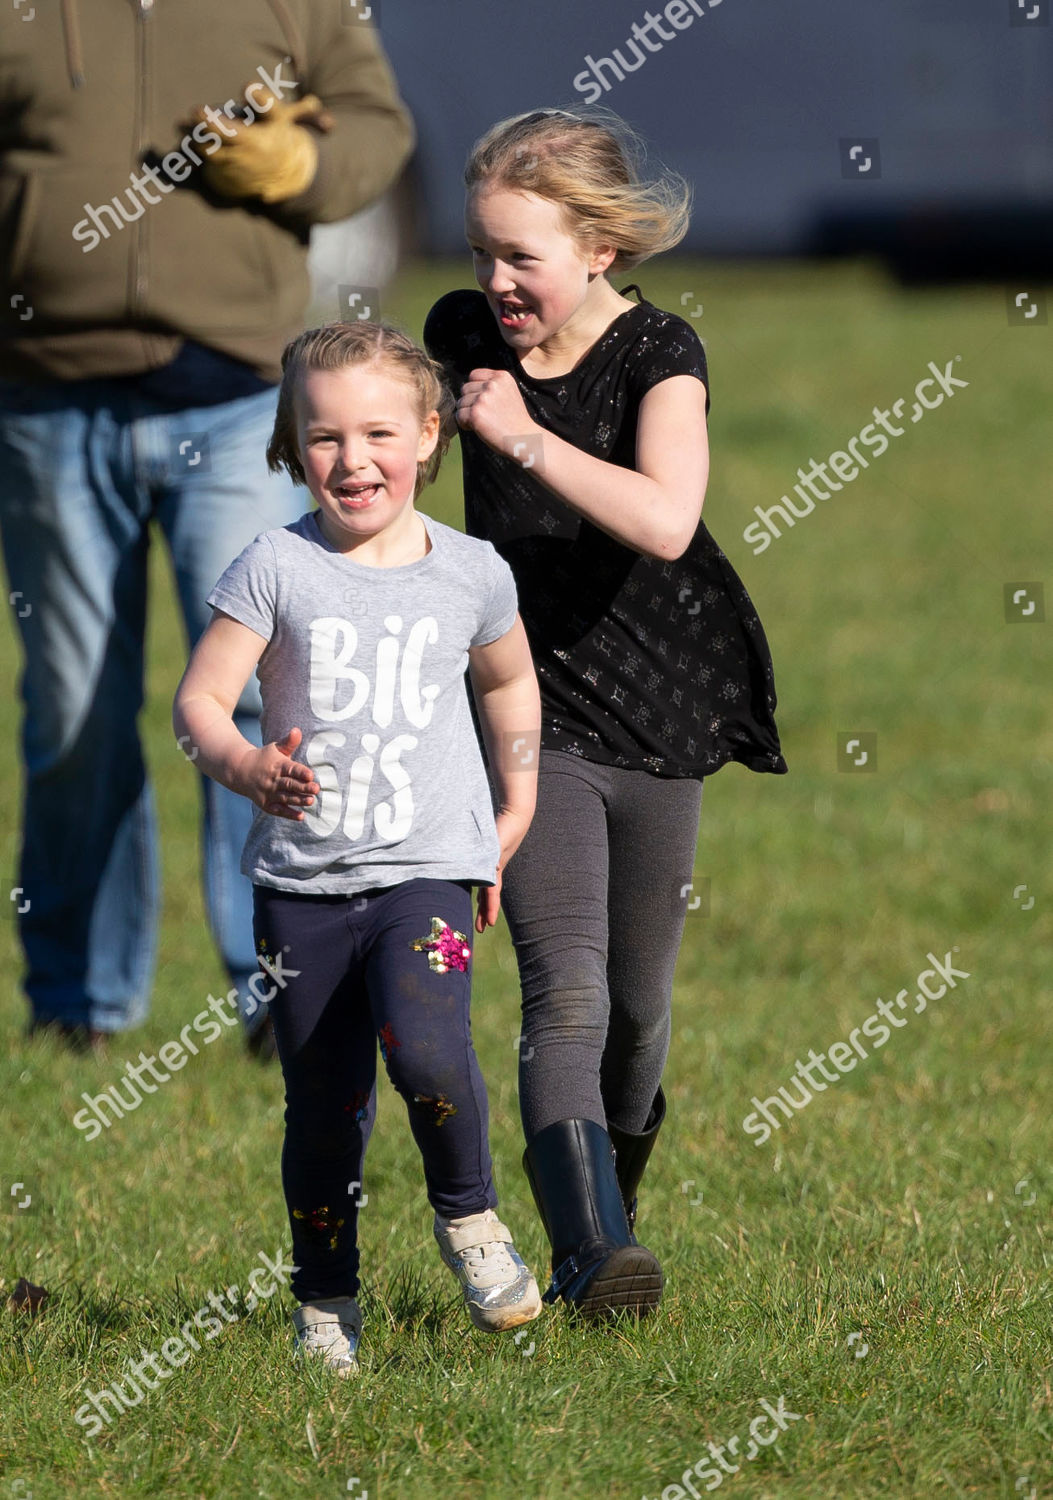 the-landrover-horse-trials-gatcombe-park-gloucestershire-uk-shutterstock-editorial-10165571y.jpg